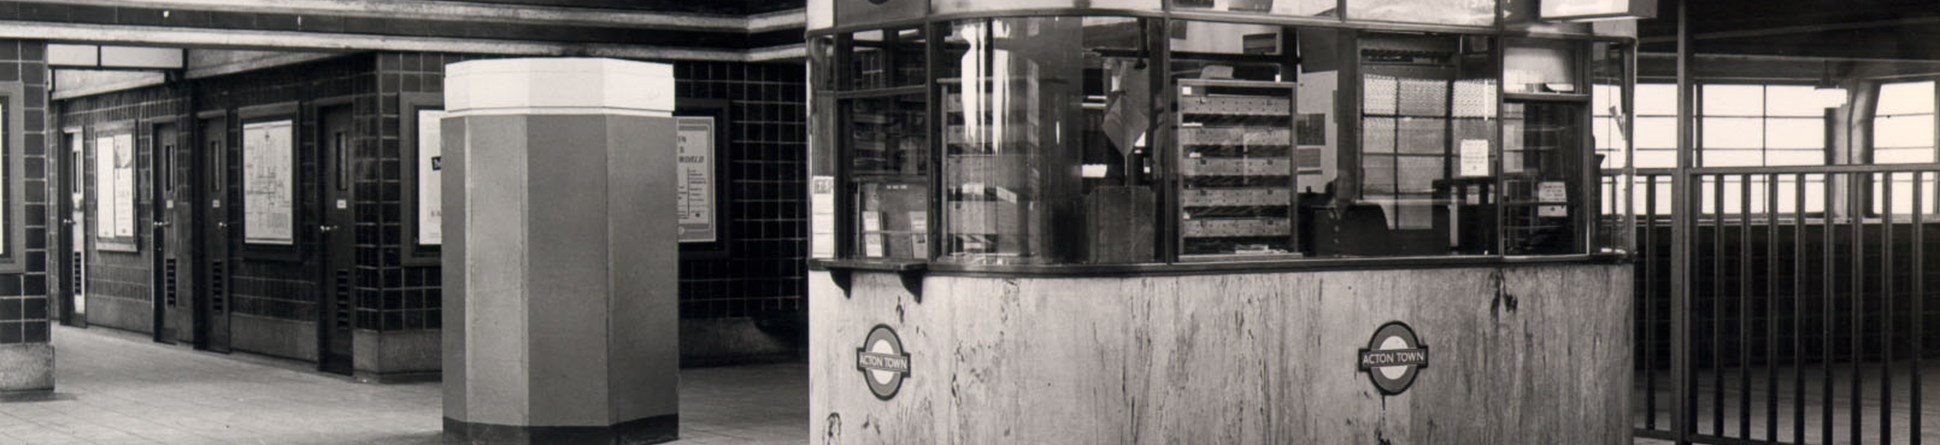 Black and white photo of Acton Town Underground Station ticket booth